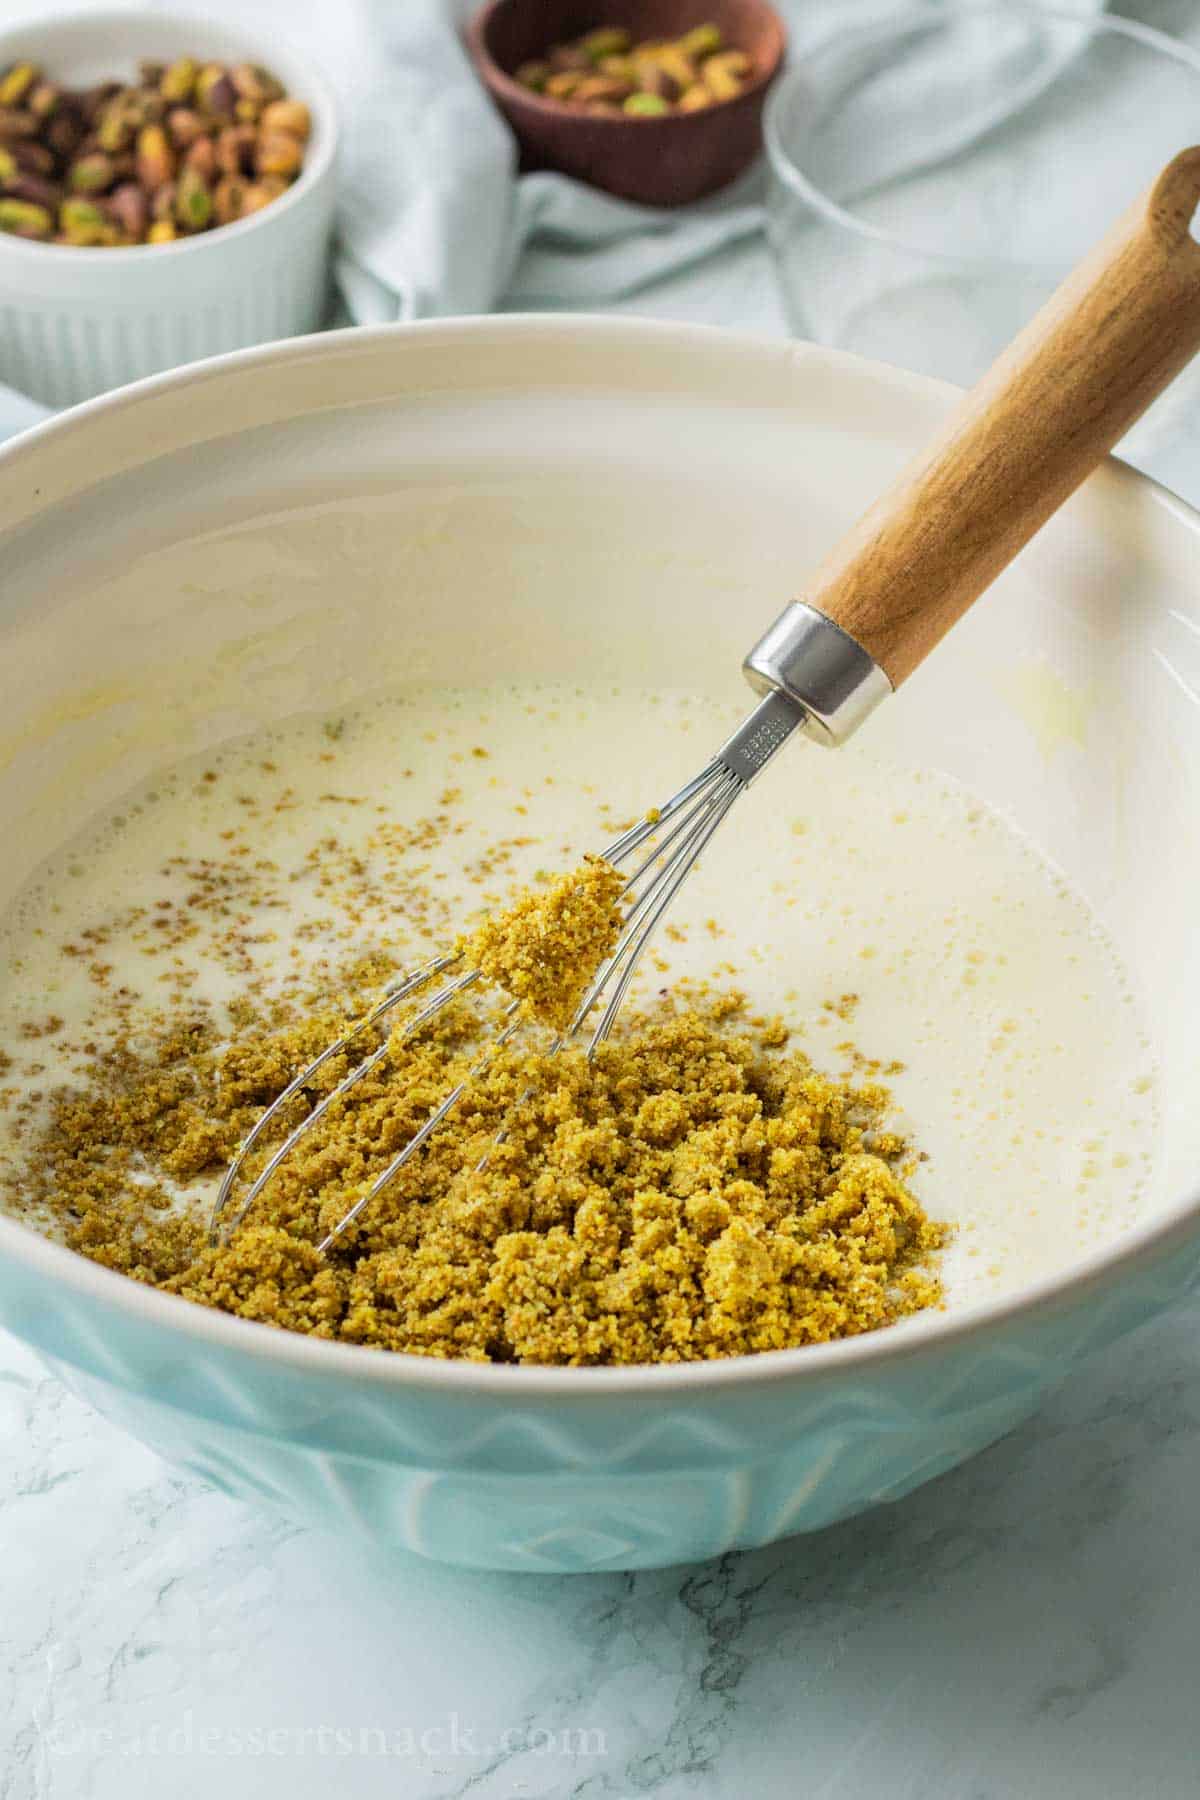 Pouring ground pistachios and sugar into bowl of custard mixture.